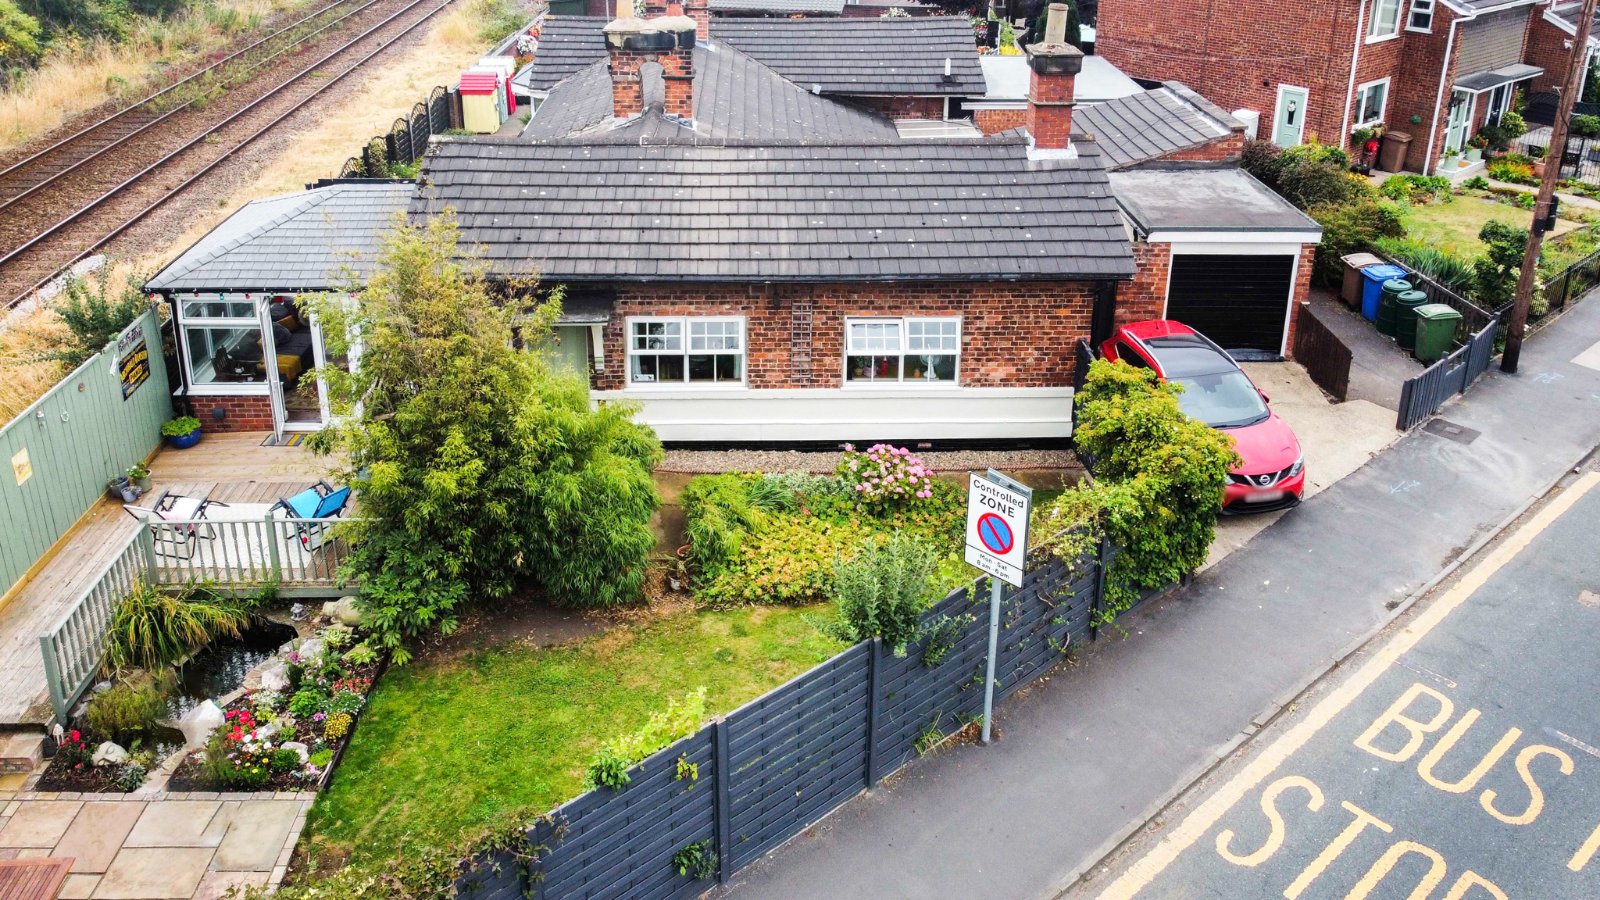 2 bed bungalow for sale in Norwood, Beverley, HU17